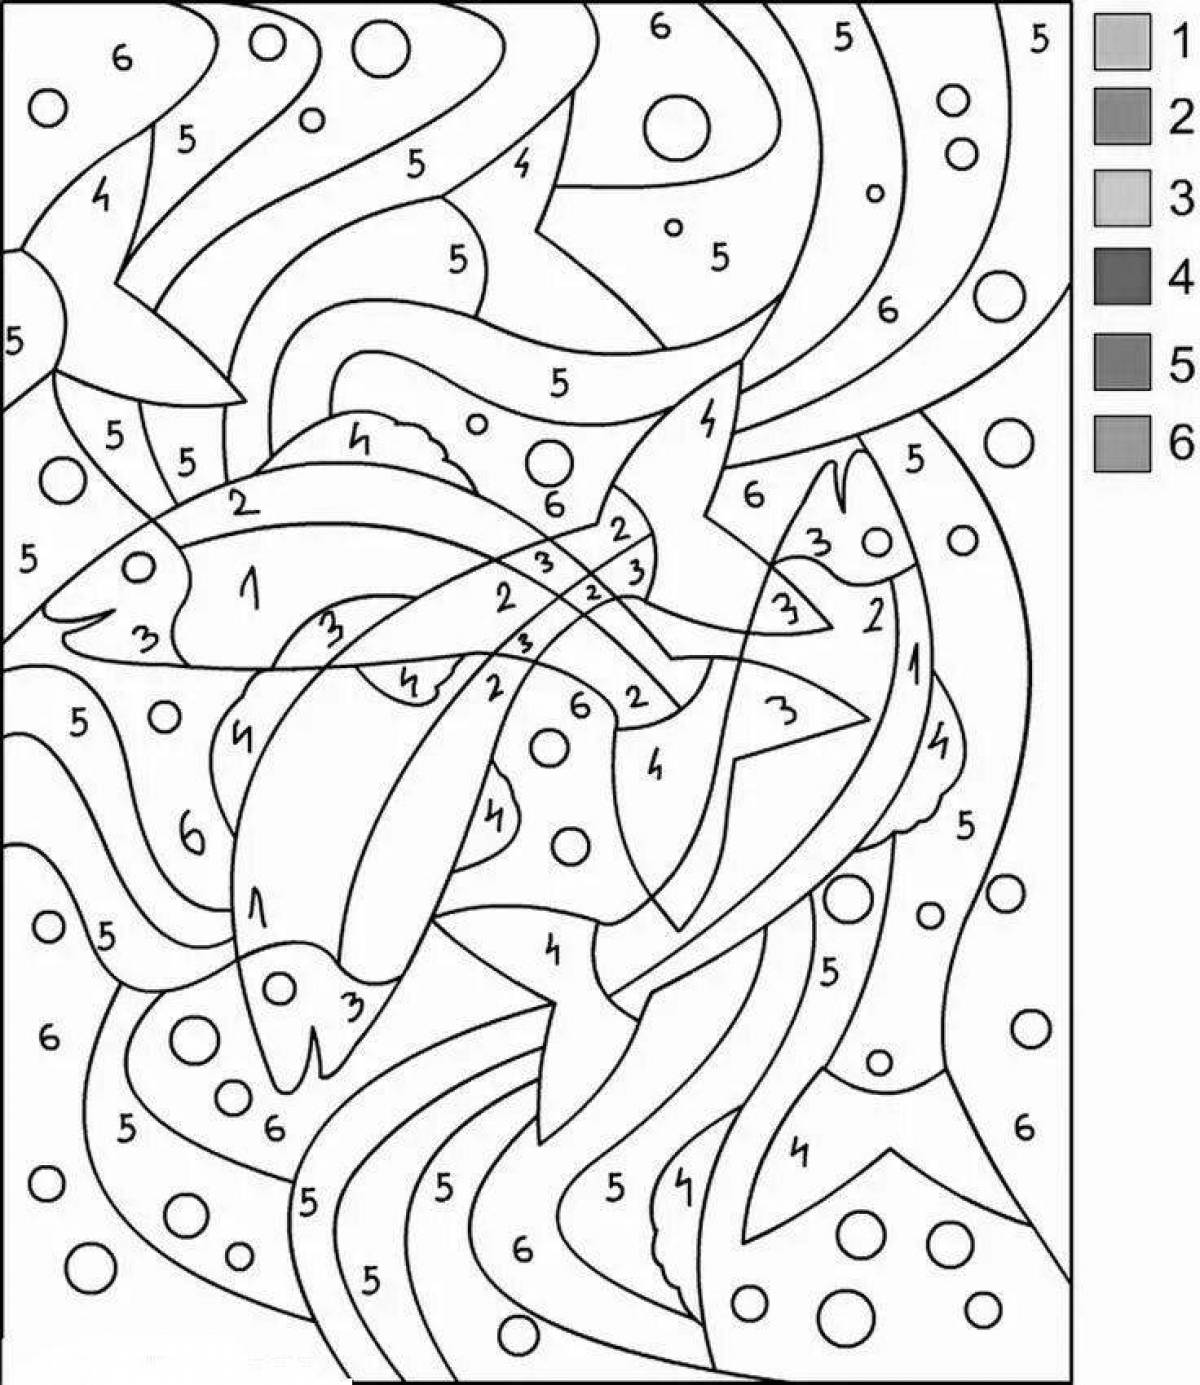 Computer coloring by numbers